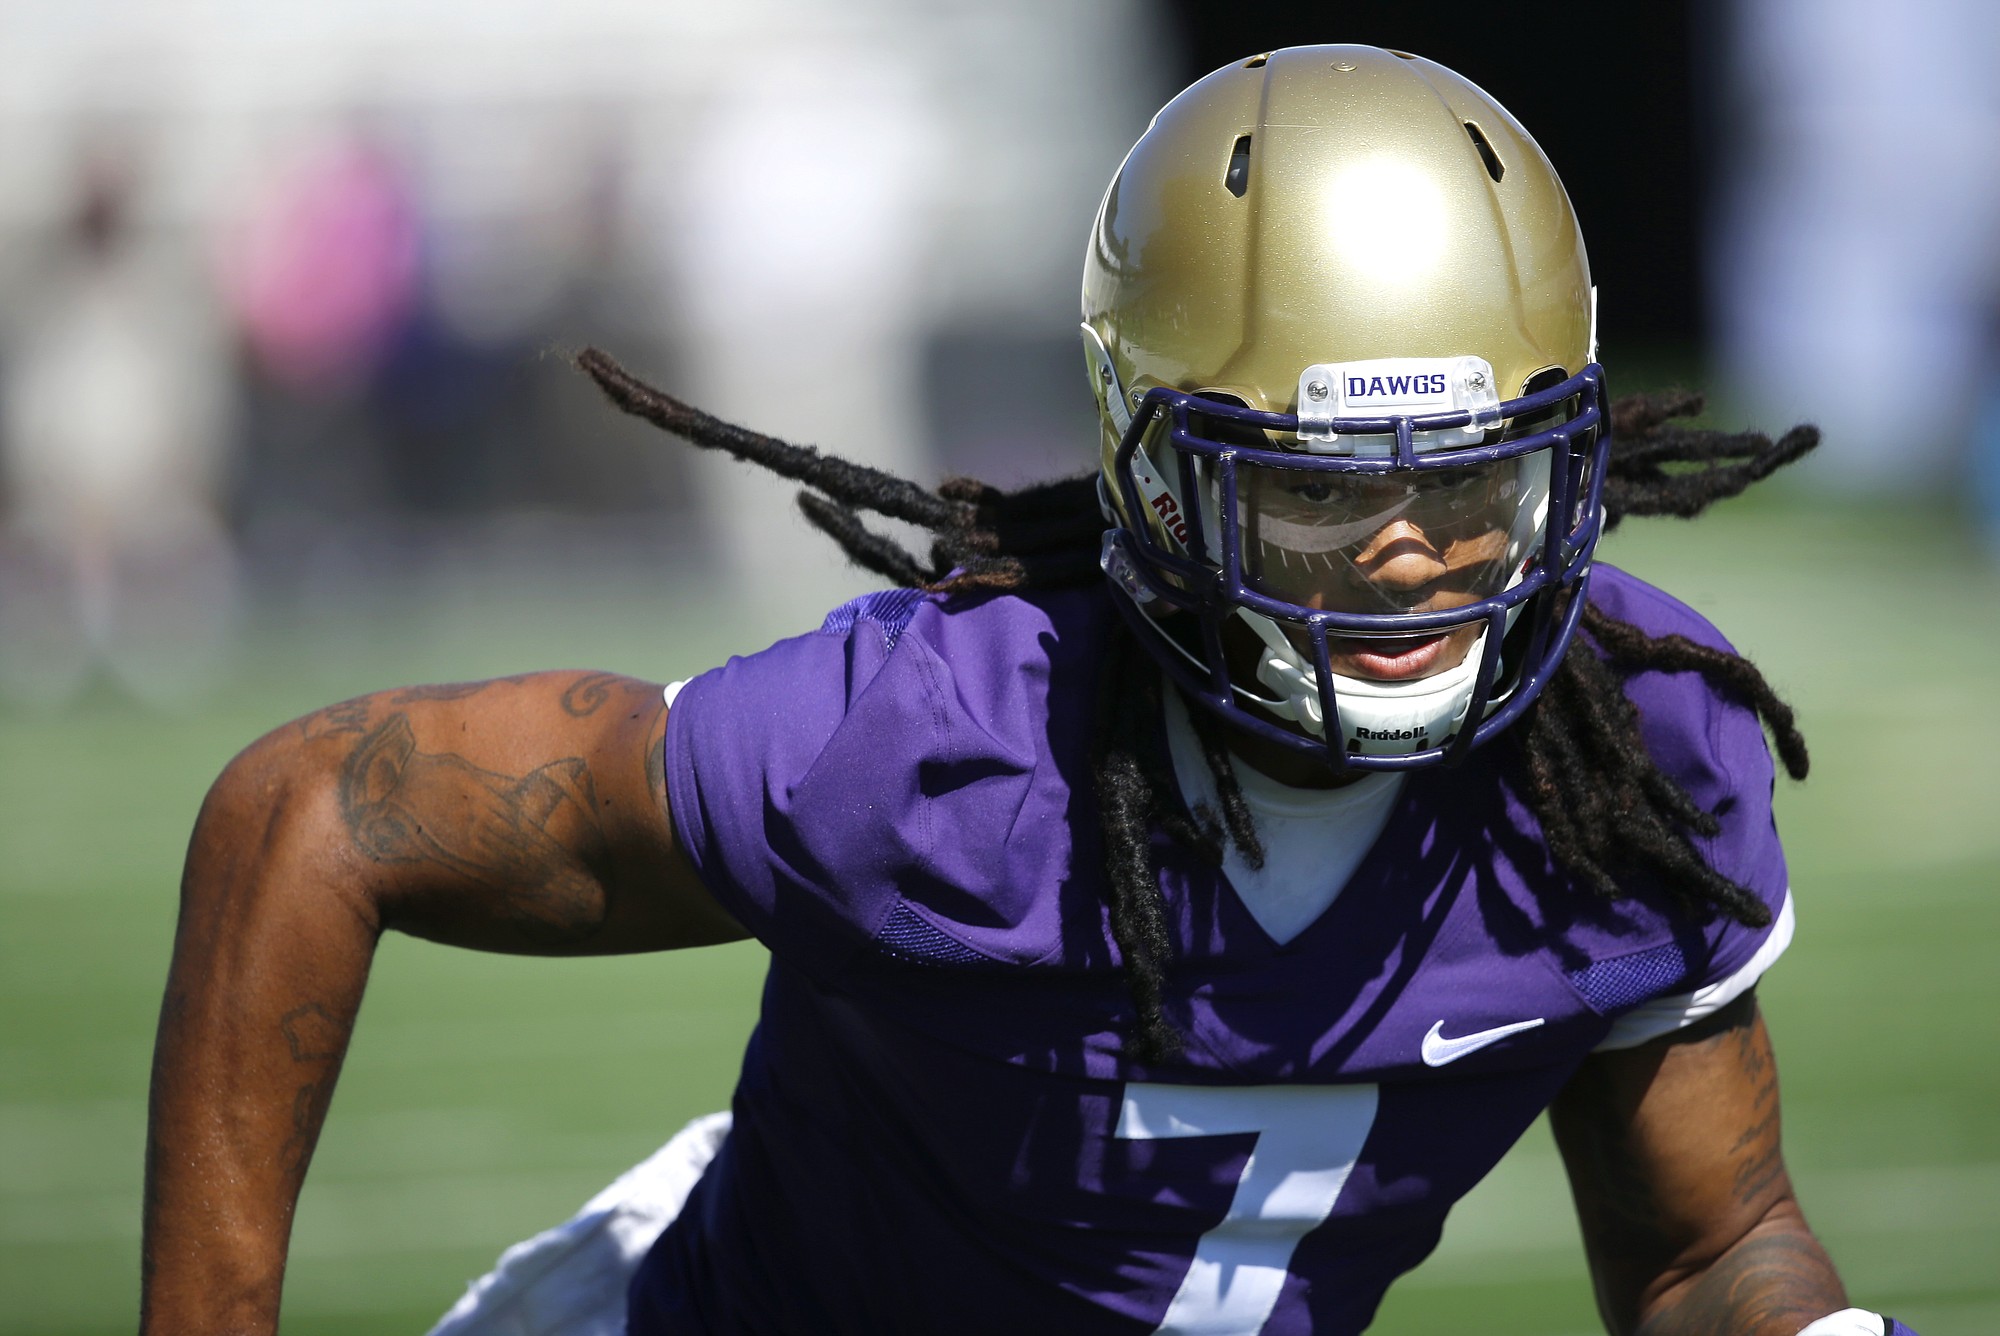 Washington linebacker Shaq Thompson runs through a drill during the first session of NCAA college football practice before the upcoming fall season, Monday, Aug. 4, 2014, in Seattle. (AP Photo/Ted S.